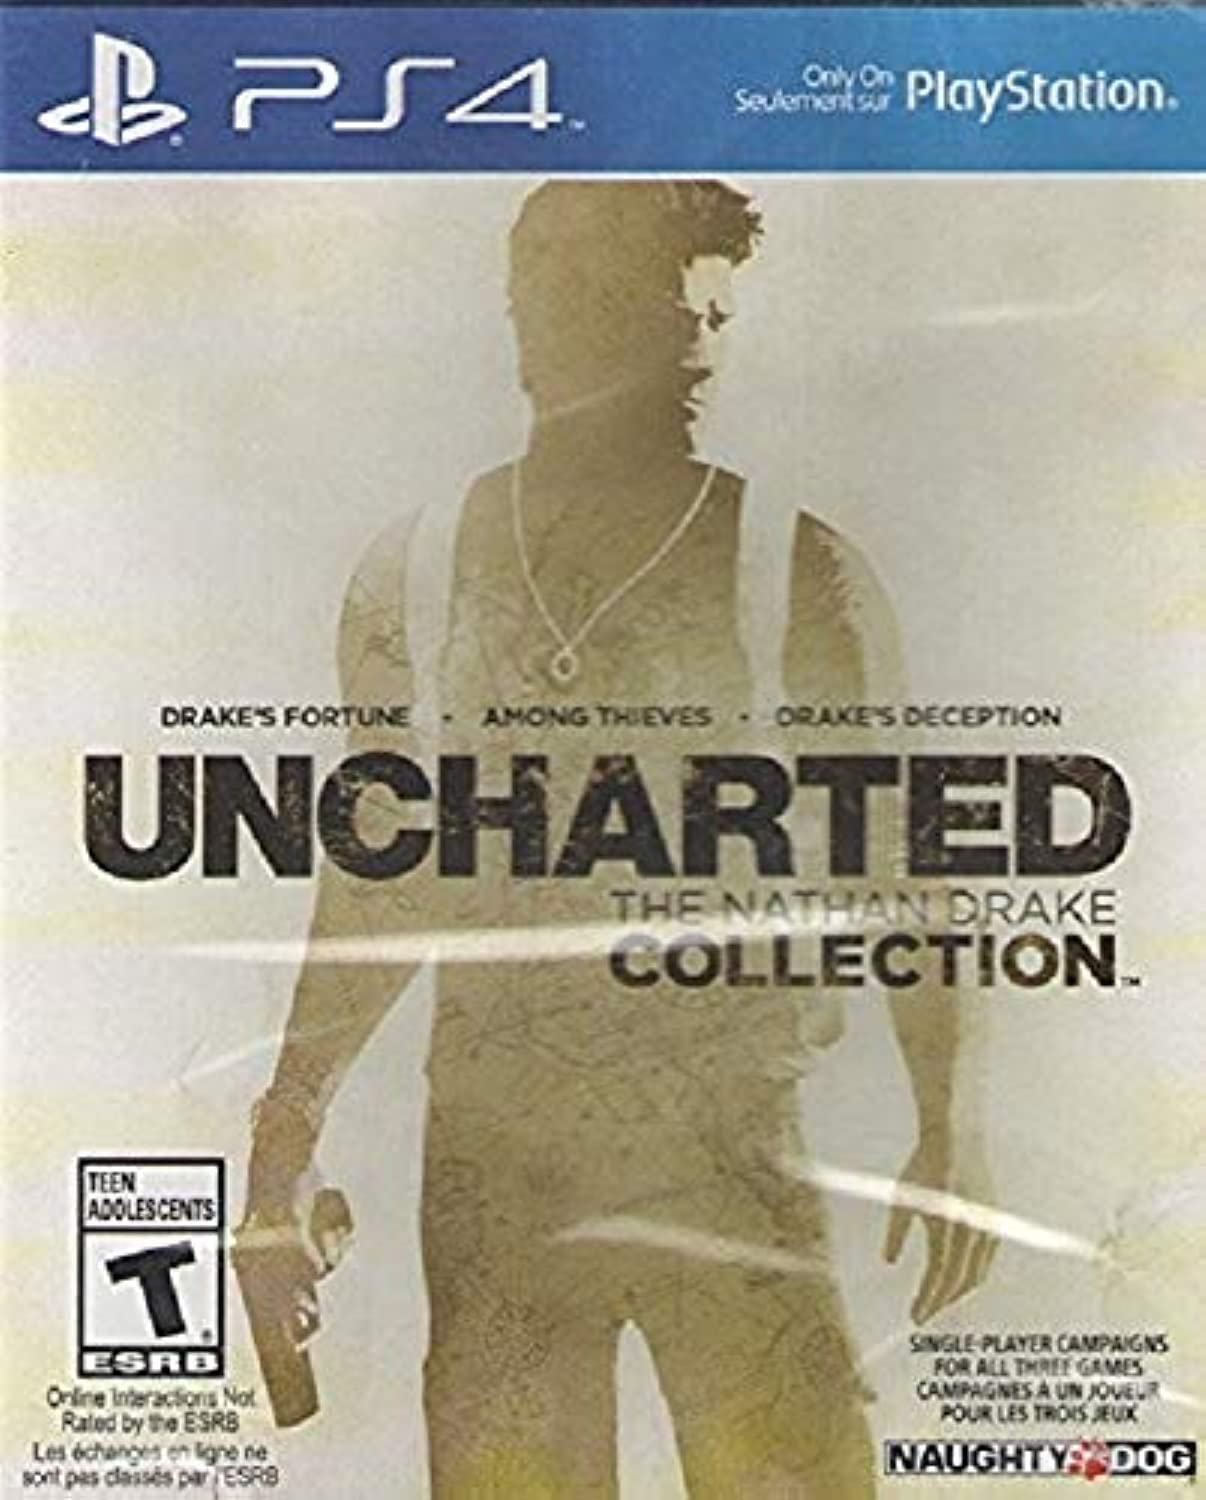 PS4 Uncharted The Nathan Drake Collection Rated T (Teen) RRP 17.99 CLEARANCE XL 11.99